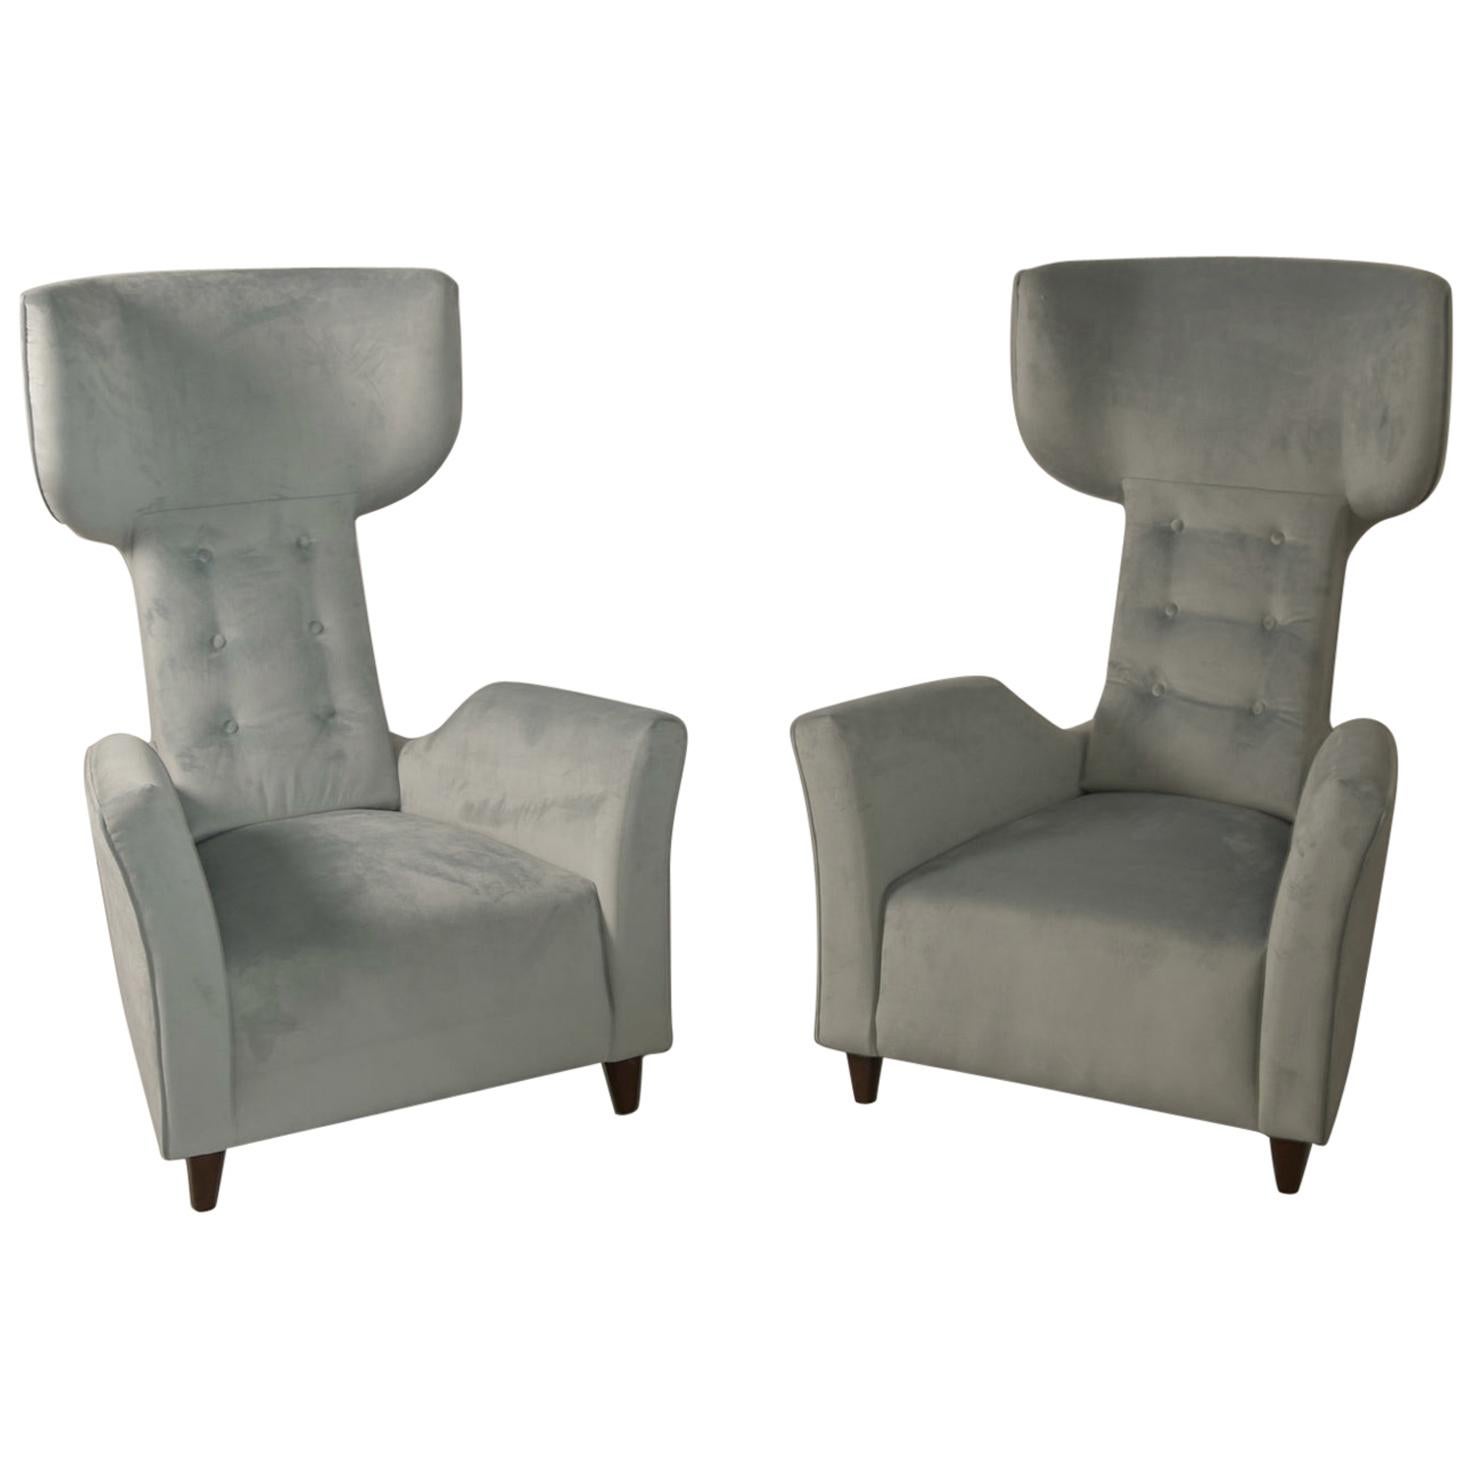 Sculptural Pair of Armchairs Attributed Franco Campi & Carlo Graffi Italy, 1950